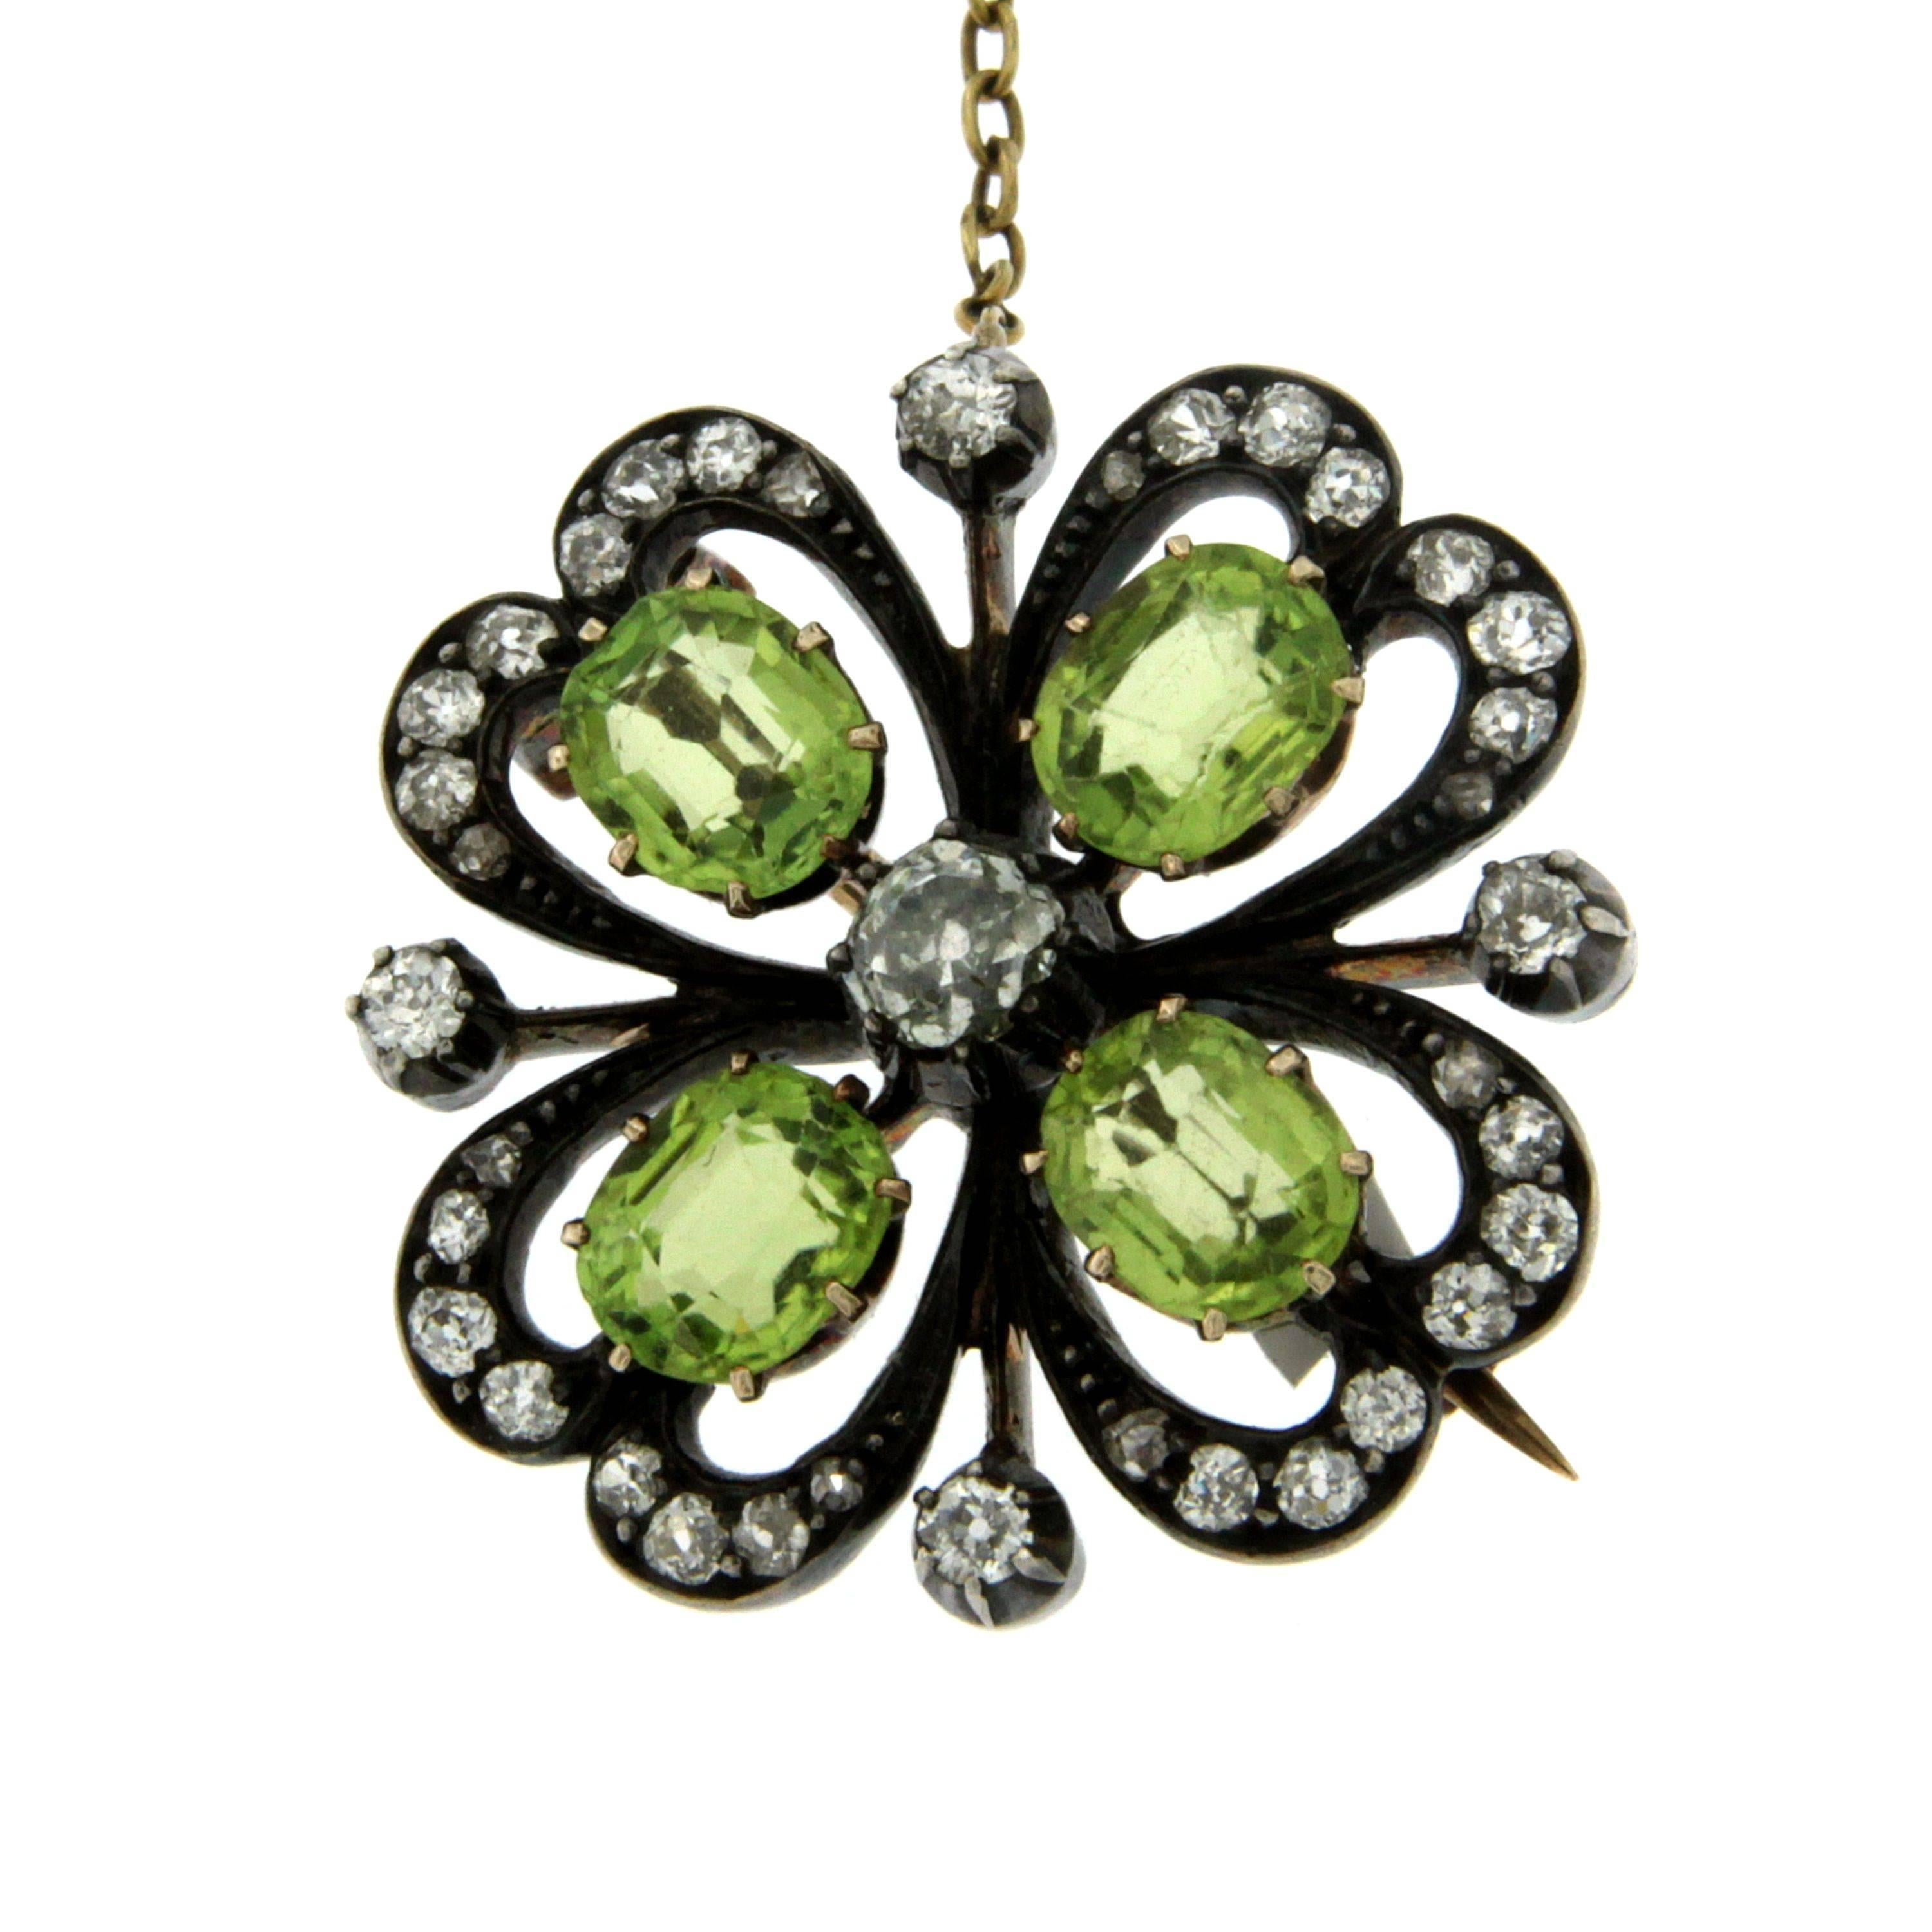 This floral design antique brooch has been crafted in Silver and 12k Gold and it features approximately 6.00 cts of Peridot and 1 cts of old mine cut Diamonds.
The brooch secures to the reverse with an hinged pin and safety clasp and benefits from